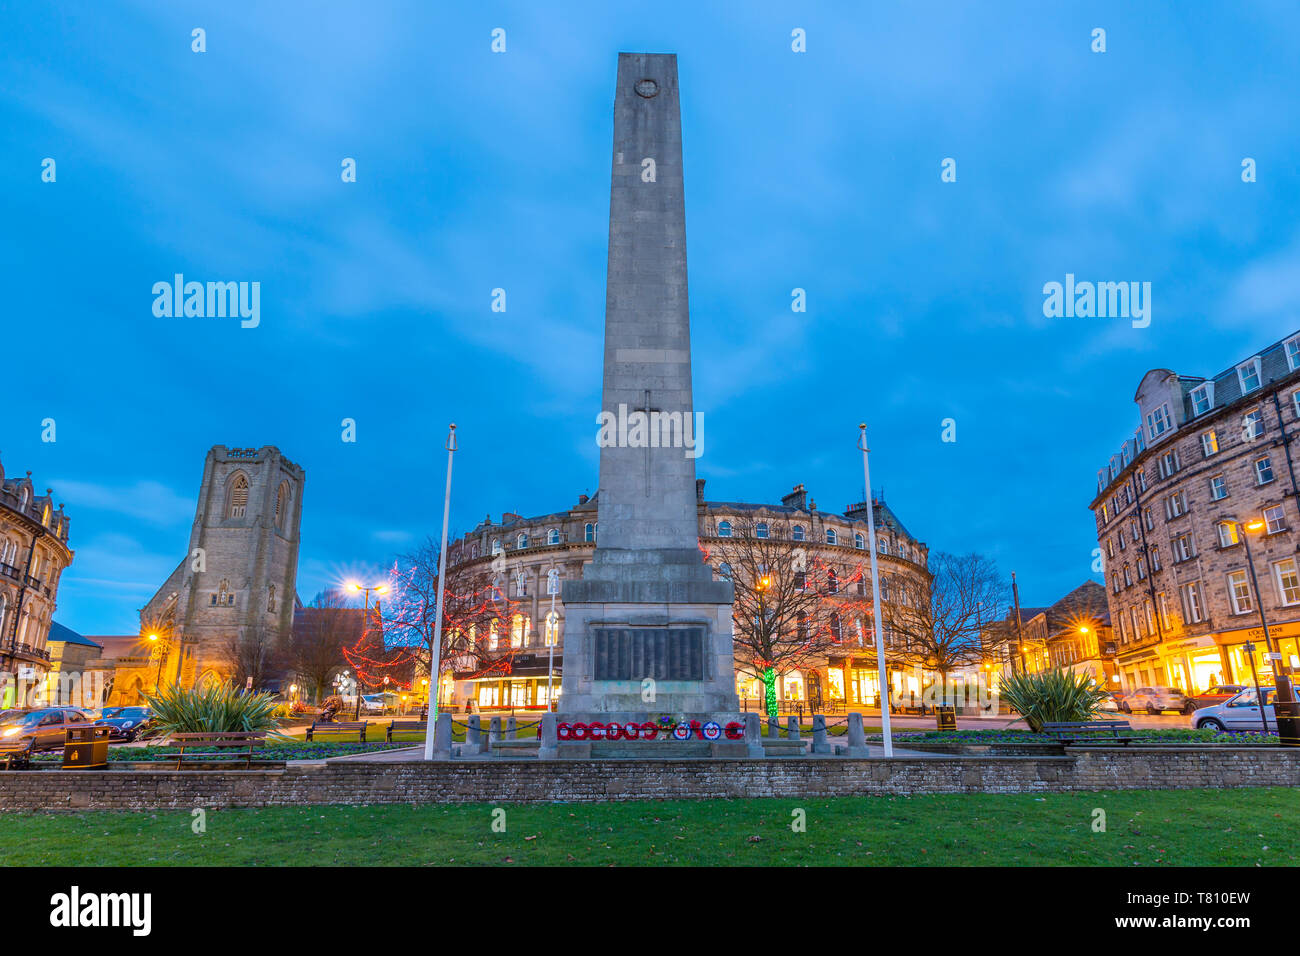 View of Cenotaph on Parliament Street at Christmas, Harrogate, North Yorkshire, England, United Kingdom, Europe Stock Photo